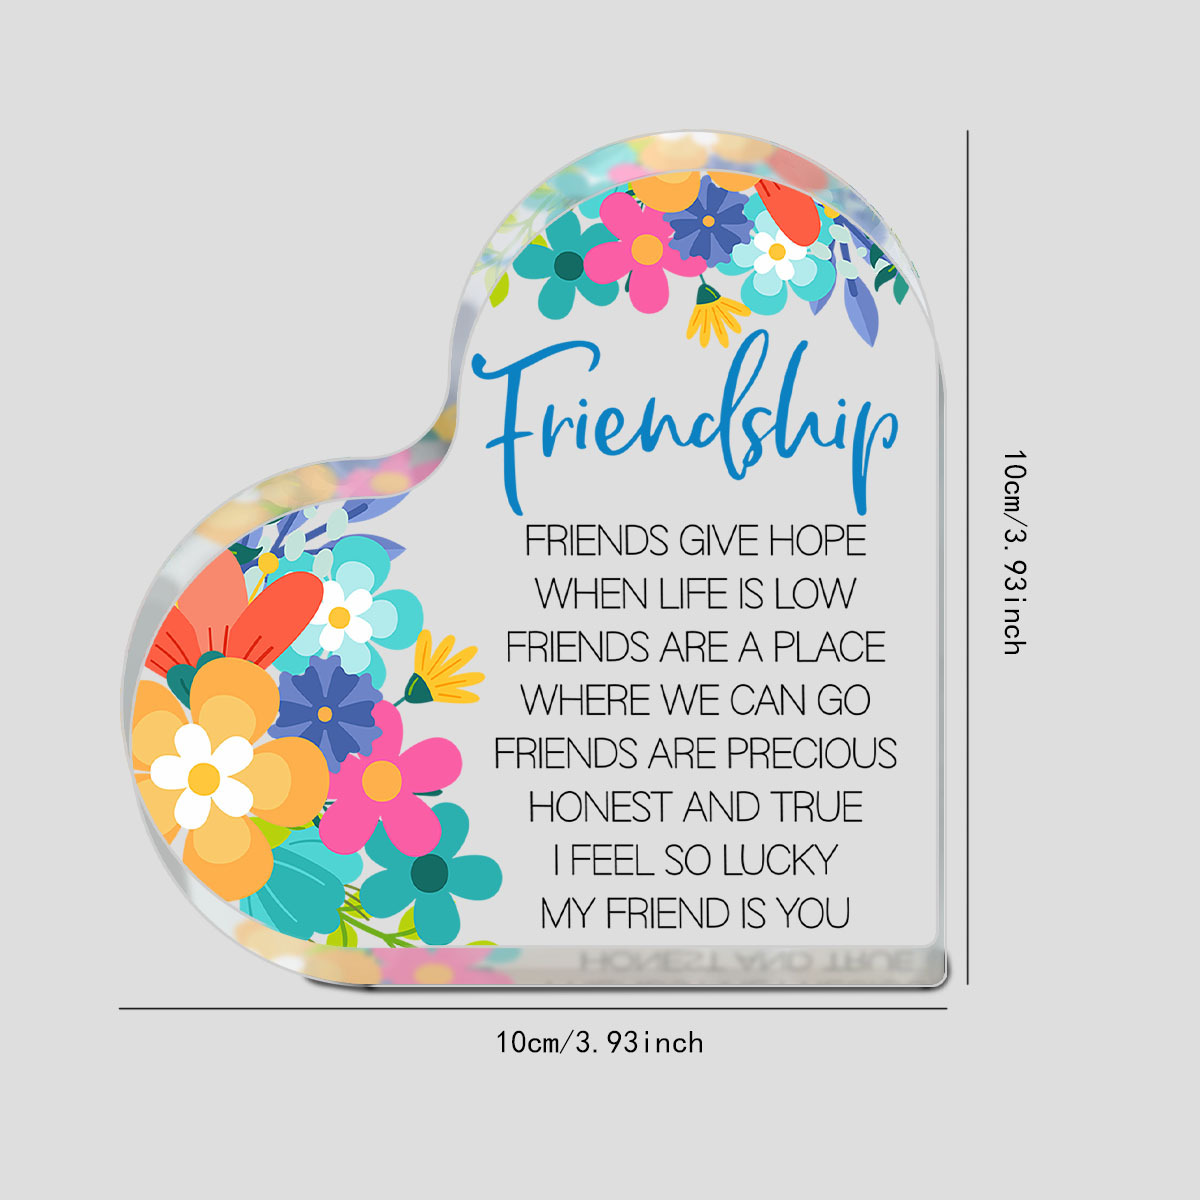 Best Friend Gift,1pc, Acrylic Gifts For Friends,Friendship Gifts